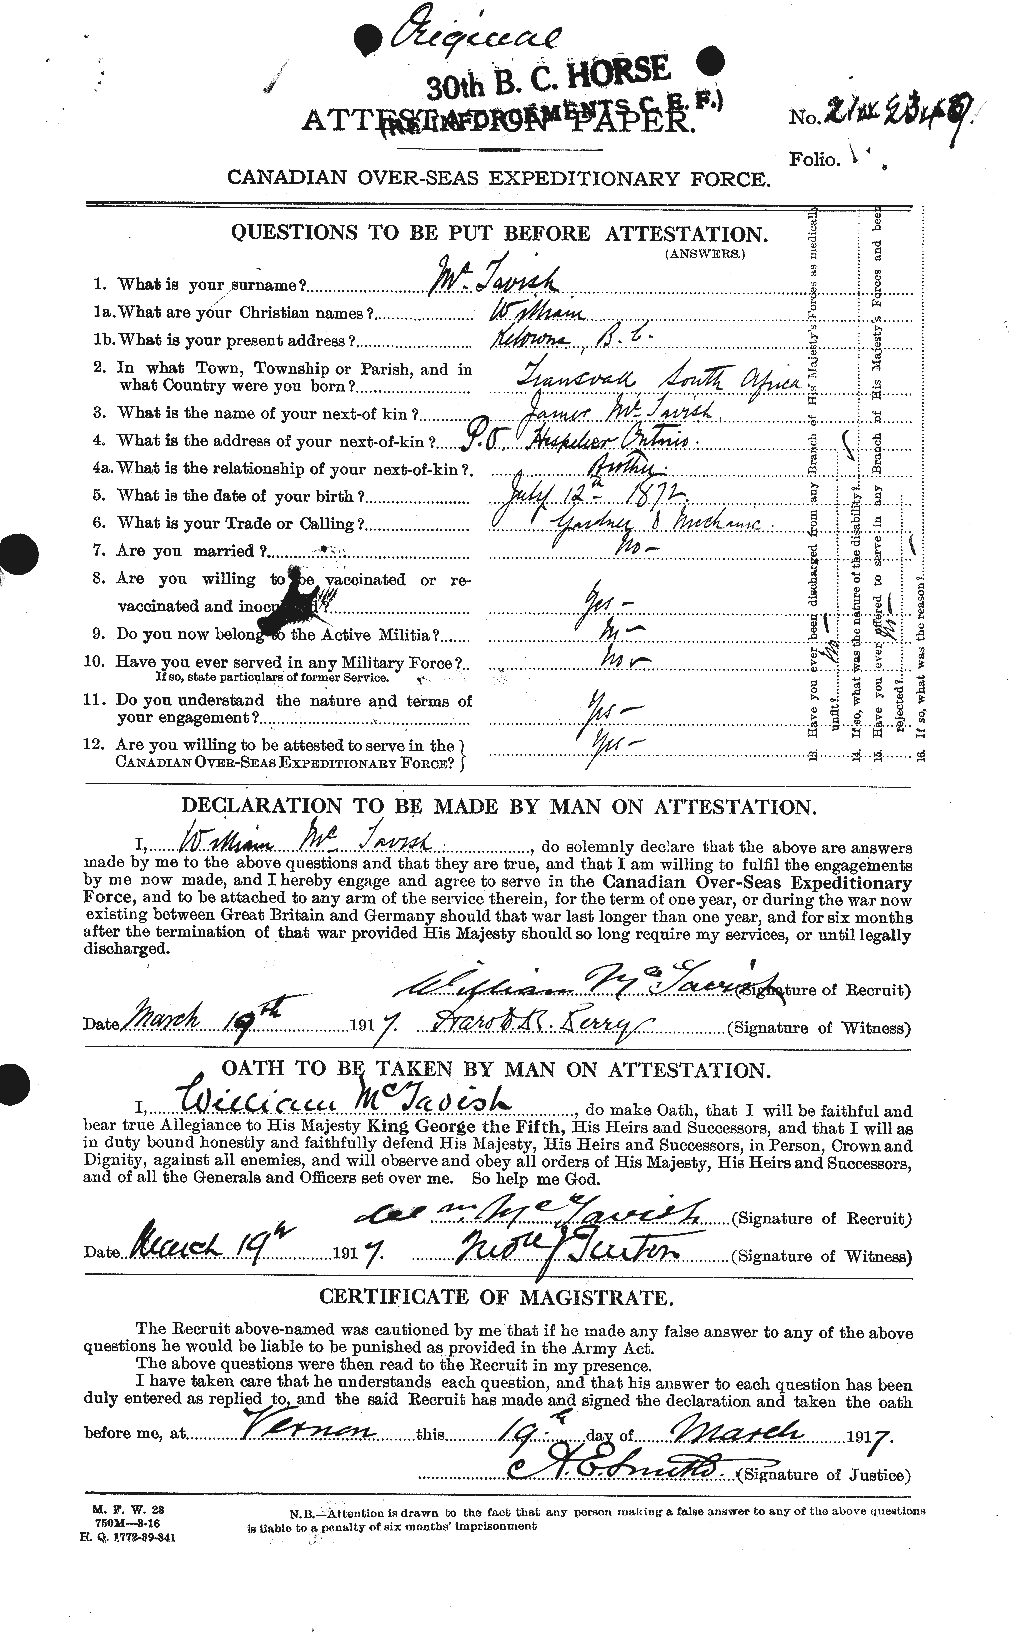 Personnel Records of the First World War - CEF 547150a